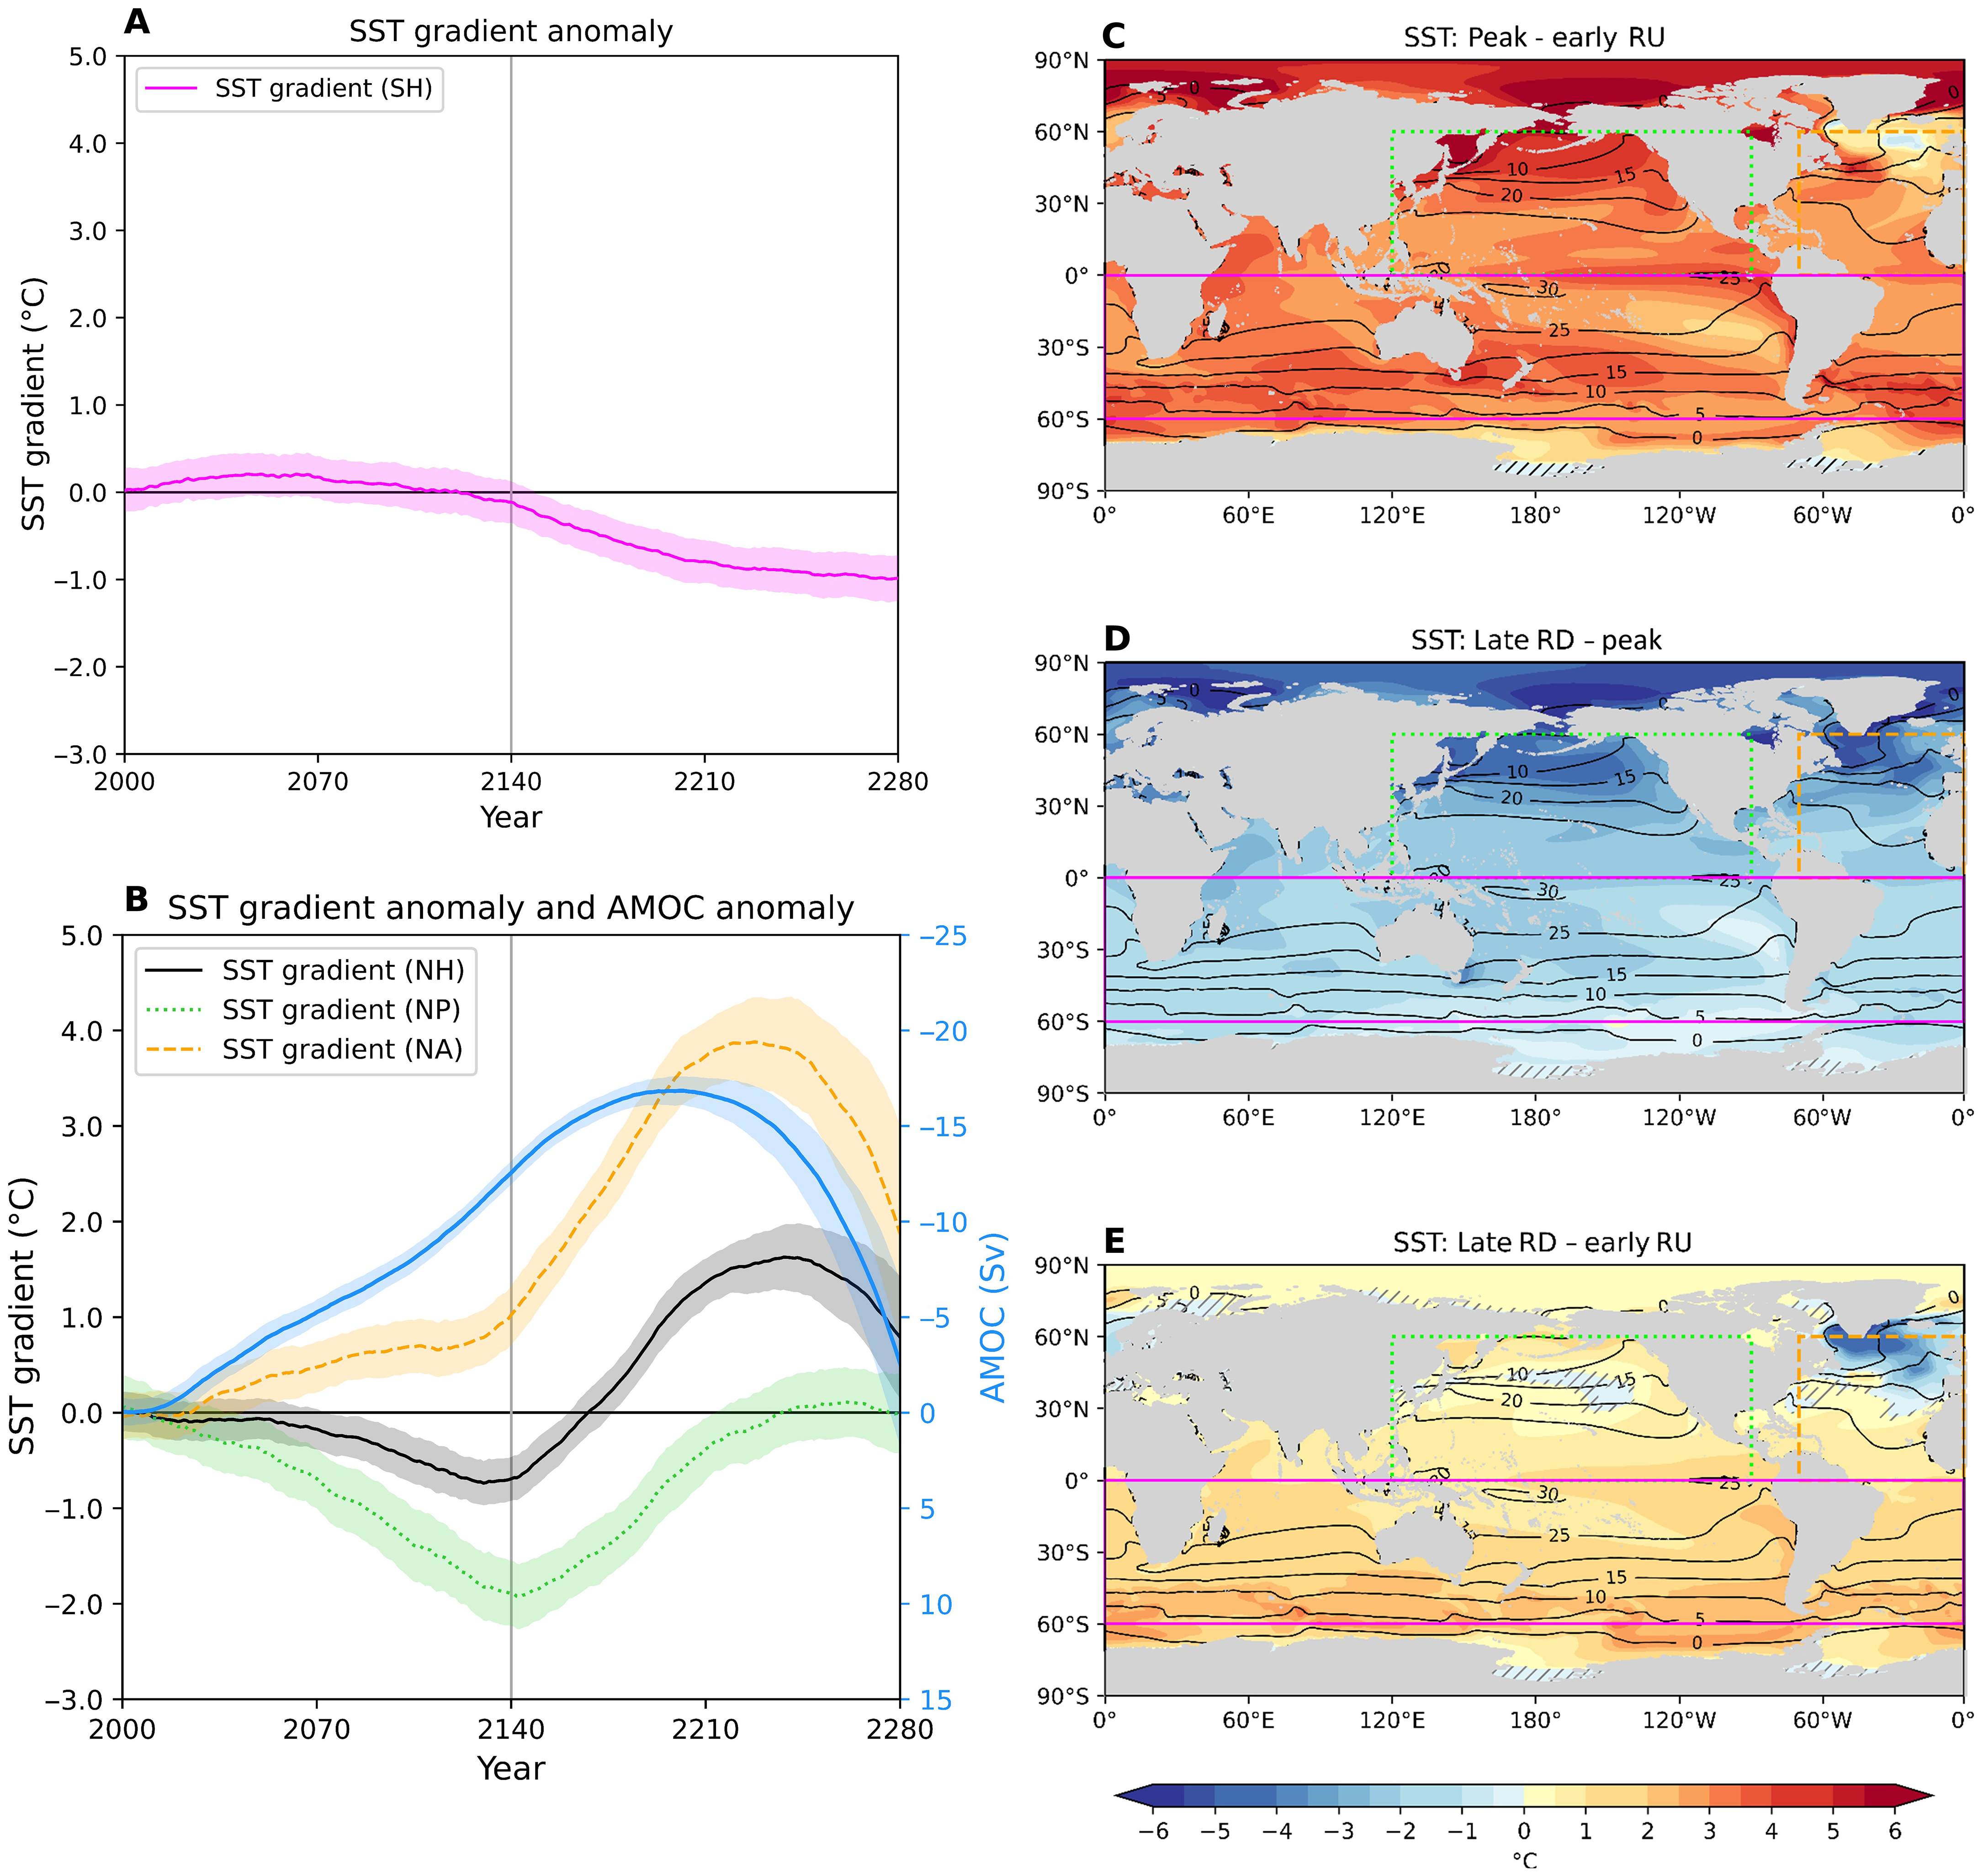 Changes of sea surface temperature (SST) gradient anomalies and the spatial distribution of SST to a changing CO2 pathway. (A) Time evolution of latitudinal gradient of sea surface temperature anomaly (unit: °C) in the SH (pink) from its PD value. (B) Same as (A) but for the NH (black), the North Pacific (NP; 120°E to 90°W, green dotted line), and the North Atlantic (NA; 70°W to 0°E, orange dashed line) sectors with the Atlantic meridional overturning circulation (AMOC) strength anomaly from its PD value (skyblue; unit: Sv). The SST gradient is determined by the SST differences from the tropics (0° to 15°) to the midlatitudes (45° to 60°) in each hemisphere. The AMOC strength is defined by averaging annual-mean Atlantic meridional ocean stream function within the latitudinal band from 35°N to 45°N at a depth of 1000 m. Note that the weakening of AMOC is upwards in the right axis in (B). All values are based on the ensemble mean of 28 members (subjected to an 11-year running mean), with their 1 SD ranges across the ensemble members marked with shading. (C to E) SST changes (unit: °C) for peak (2121–2160) minus early RU (2001–2040) periods, late RD (2241–2280) minus peak periods, and late RD minus early RU periods, respectively. Climatological SST in the PD climate (unit: °C) is contoured in (C) to (E). The hatched regions in (C) to (E) indicate where temperature changes are statistically insignificant at the 95% confidence level. The SH, NP, and NA sectors for the SST gradient in (A) and (B) are denoted by colored boxes in (C) to (E). Graphic: Kim, et al., 2023 / Science Advances